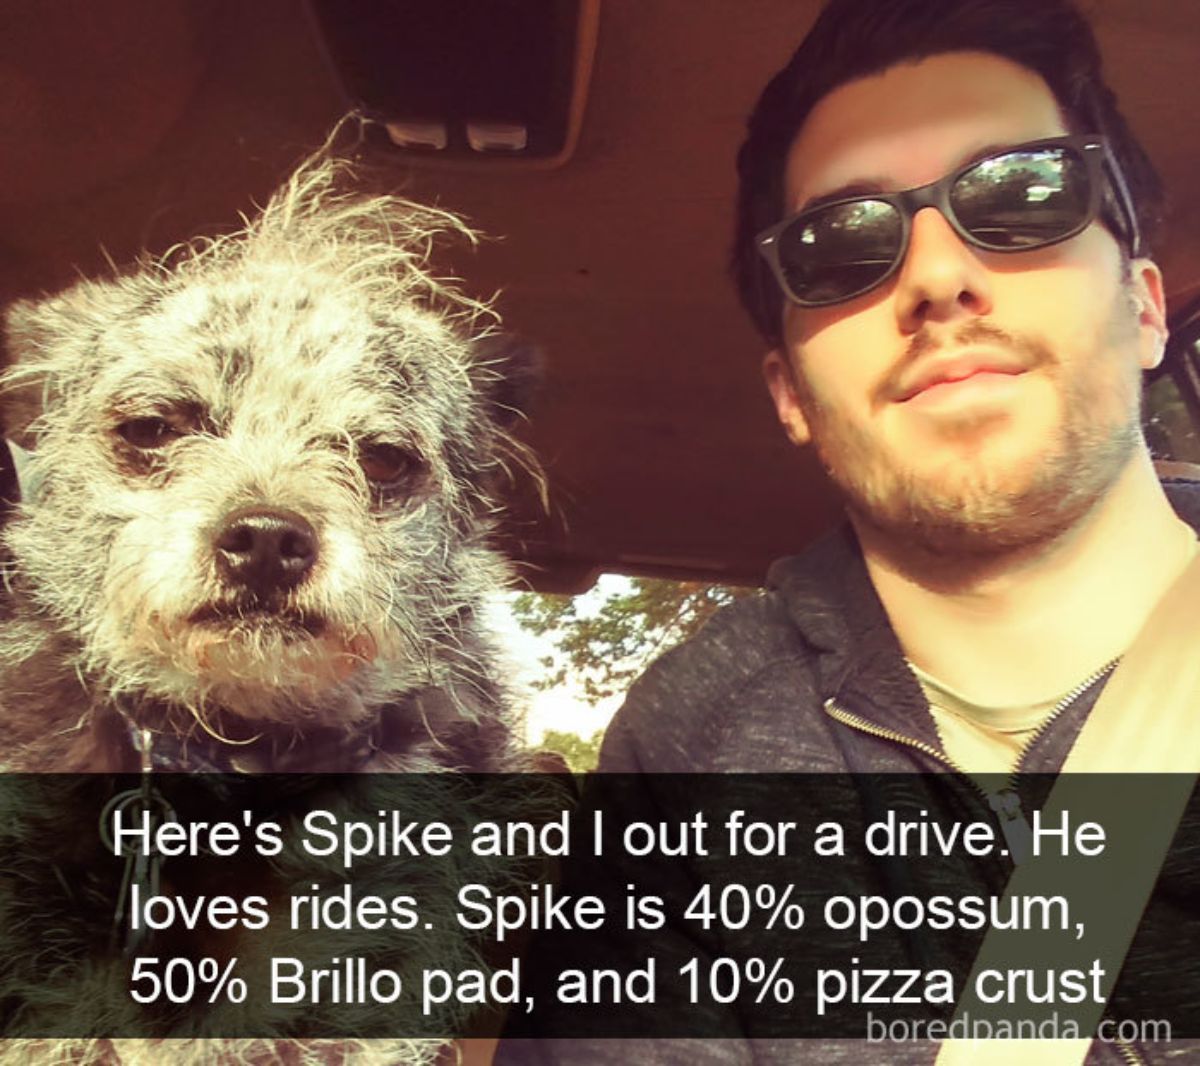 grey and white dog next to a man with a caption saying here's Spike and I out fr a drive. he loves rides. Spike is 40% opossum, 50% Brillo pad and 10% pizza crust